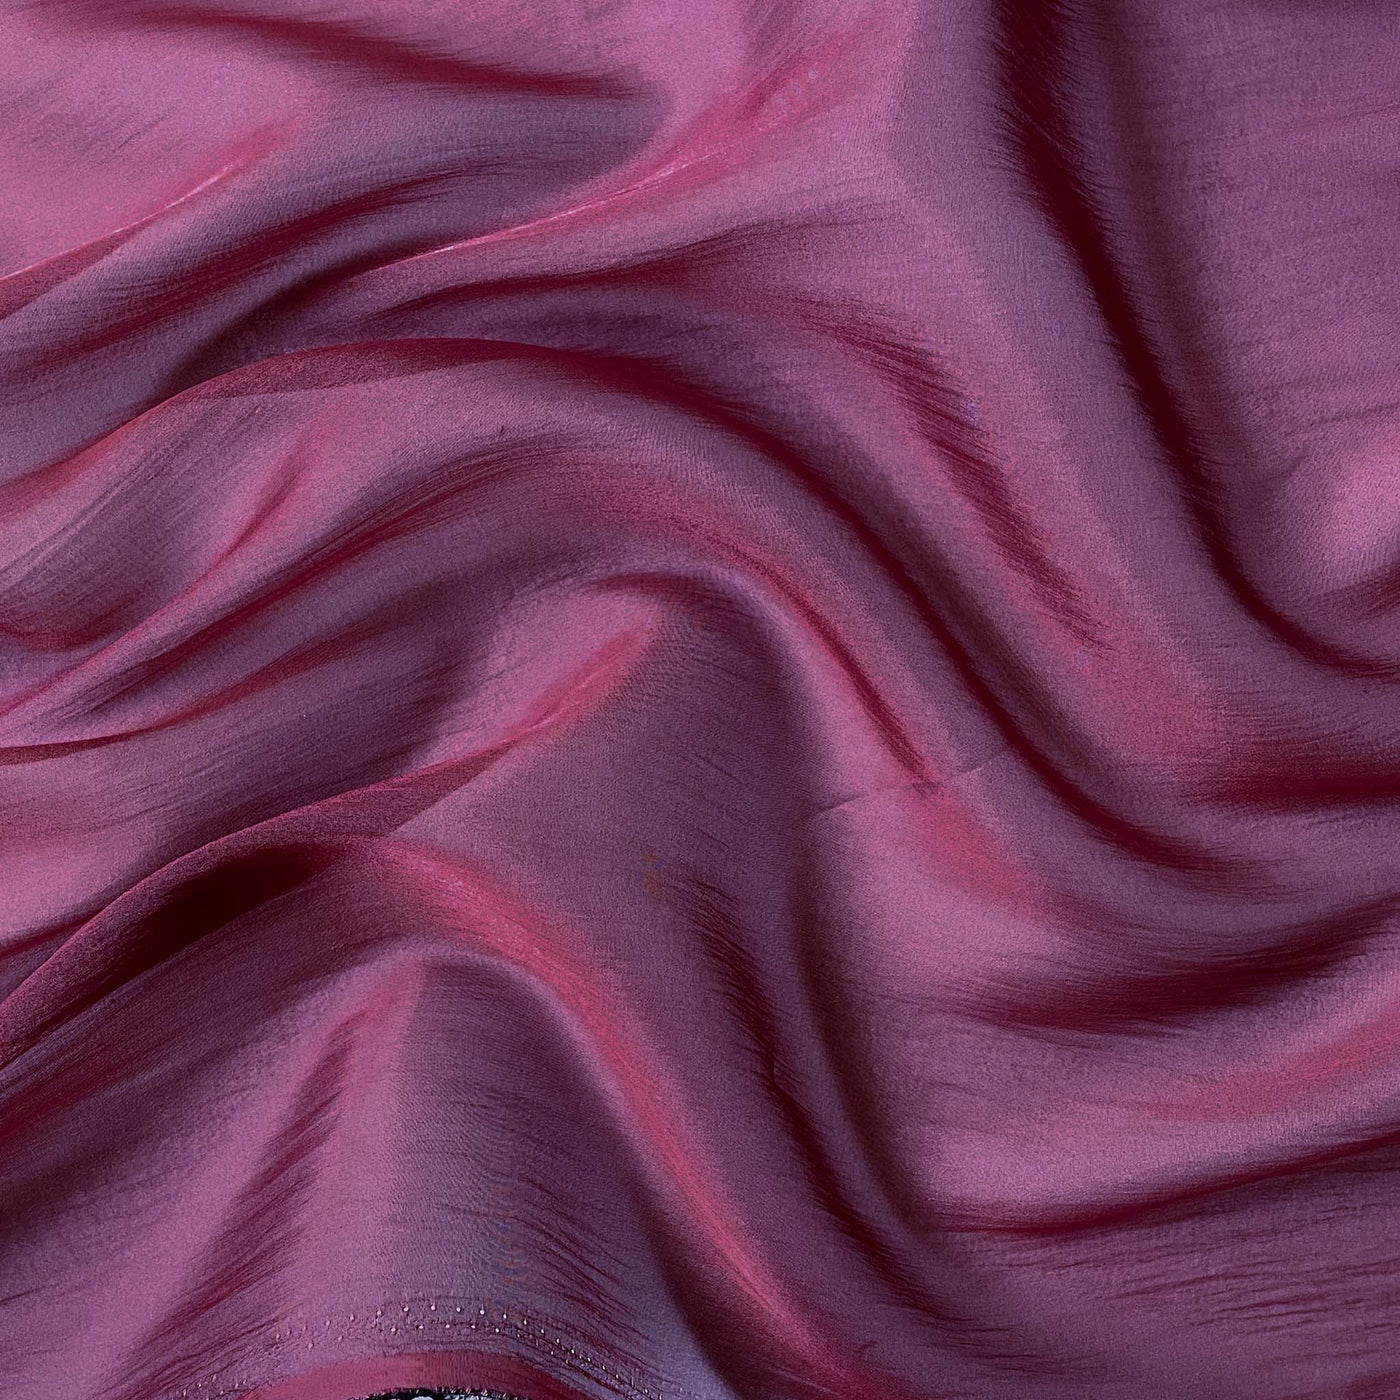 Fabric Pandit Fabric Deep Wine Plain Crinkle Organza Imported Fabric (Width 58 Inches)